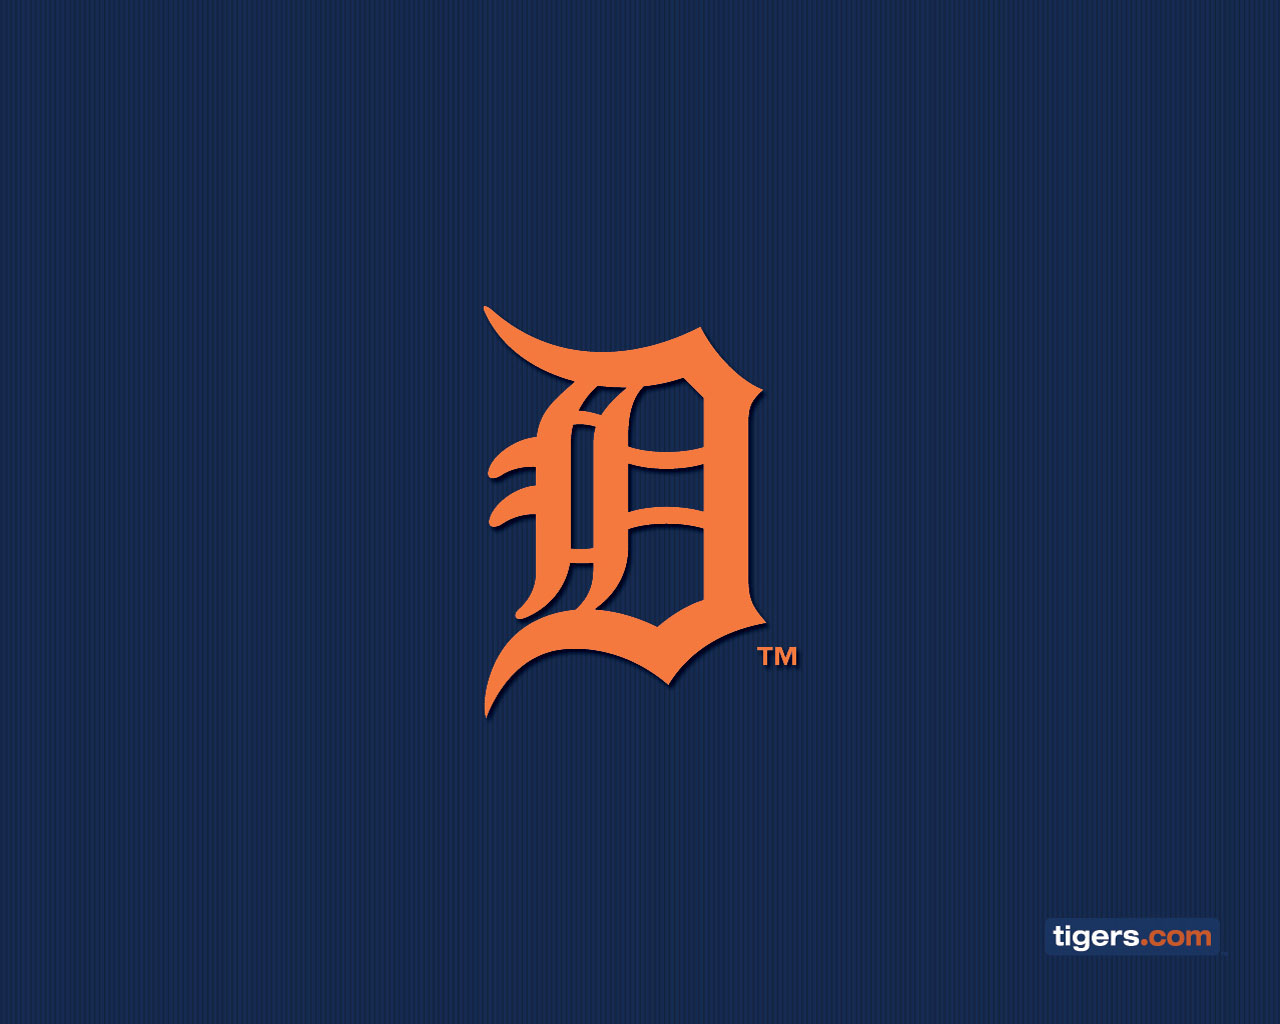 Detroit Tigers on X: Wallpaper Wednesday ⬇️